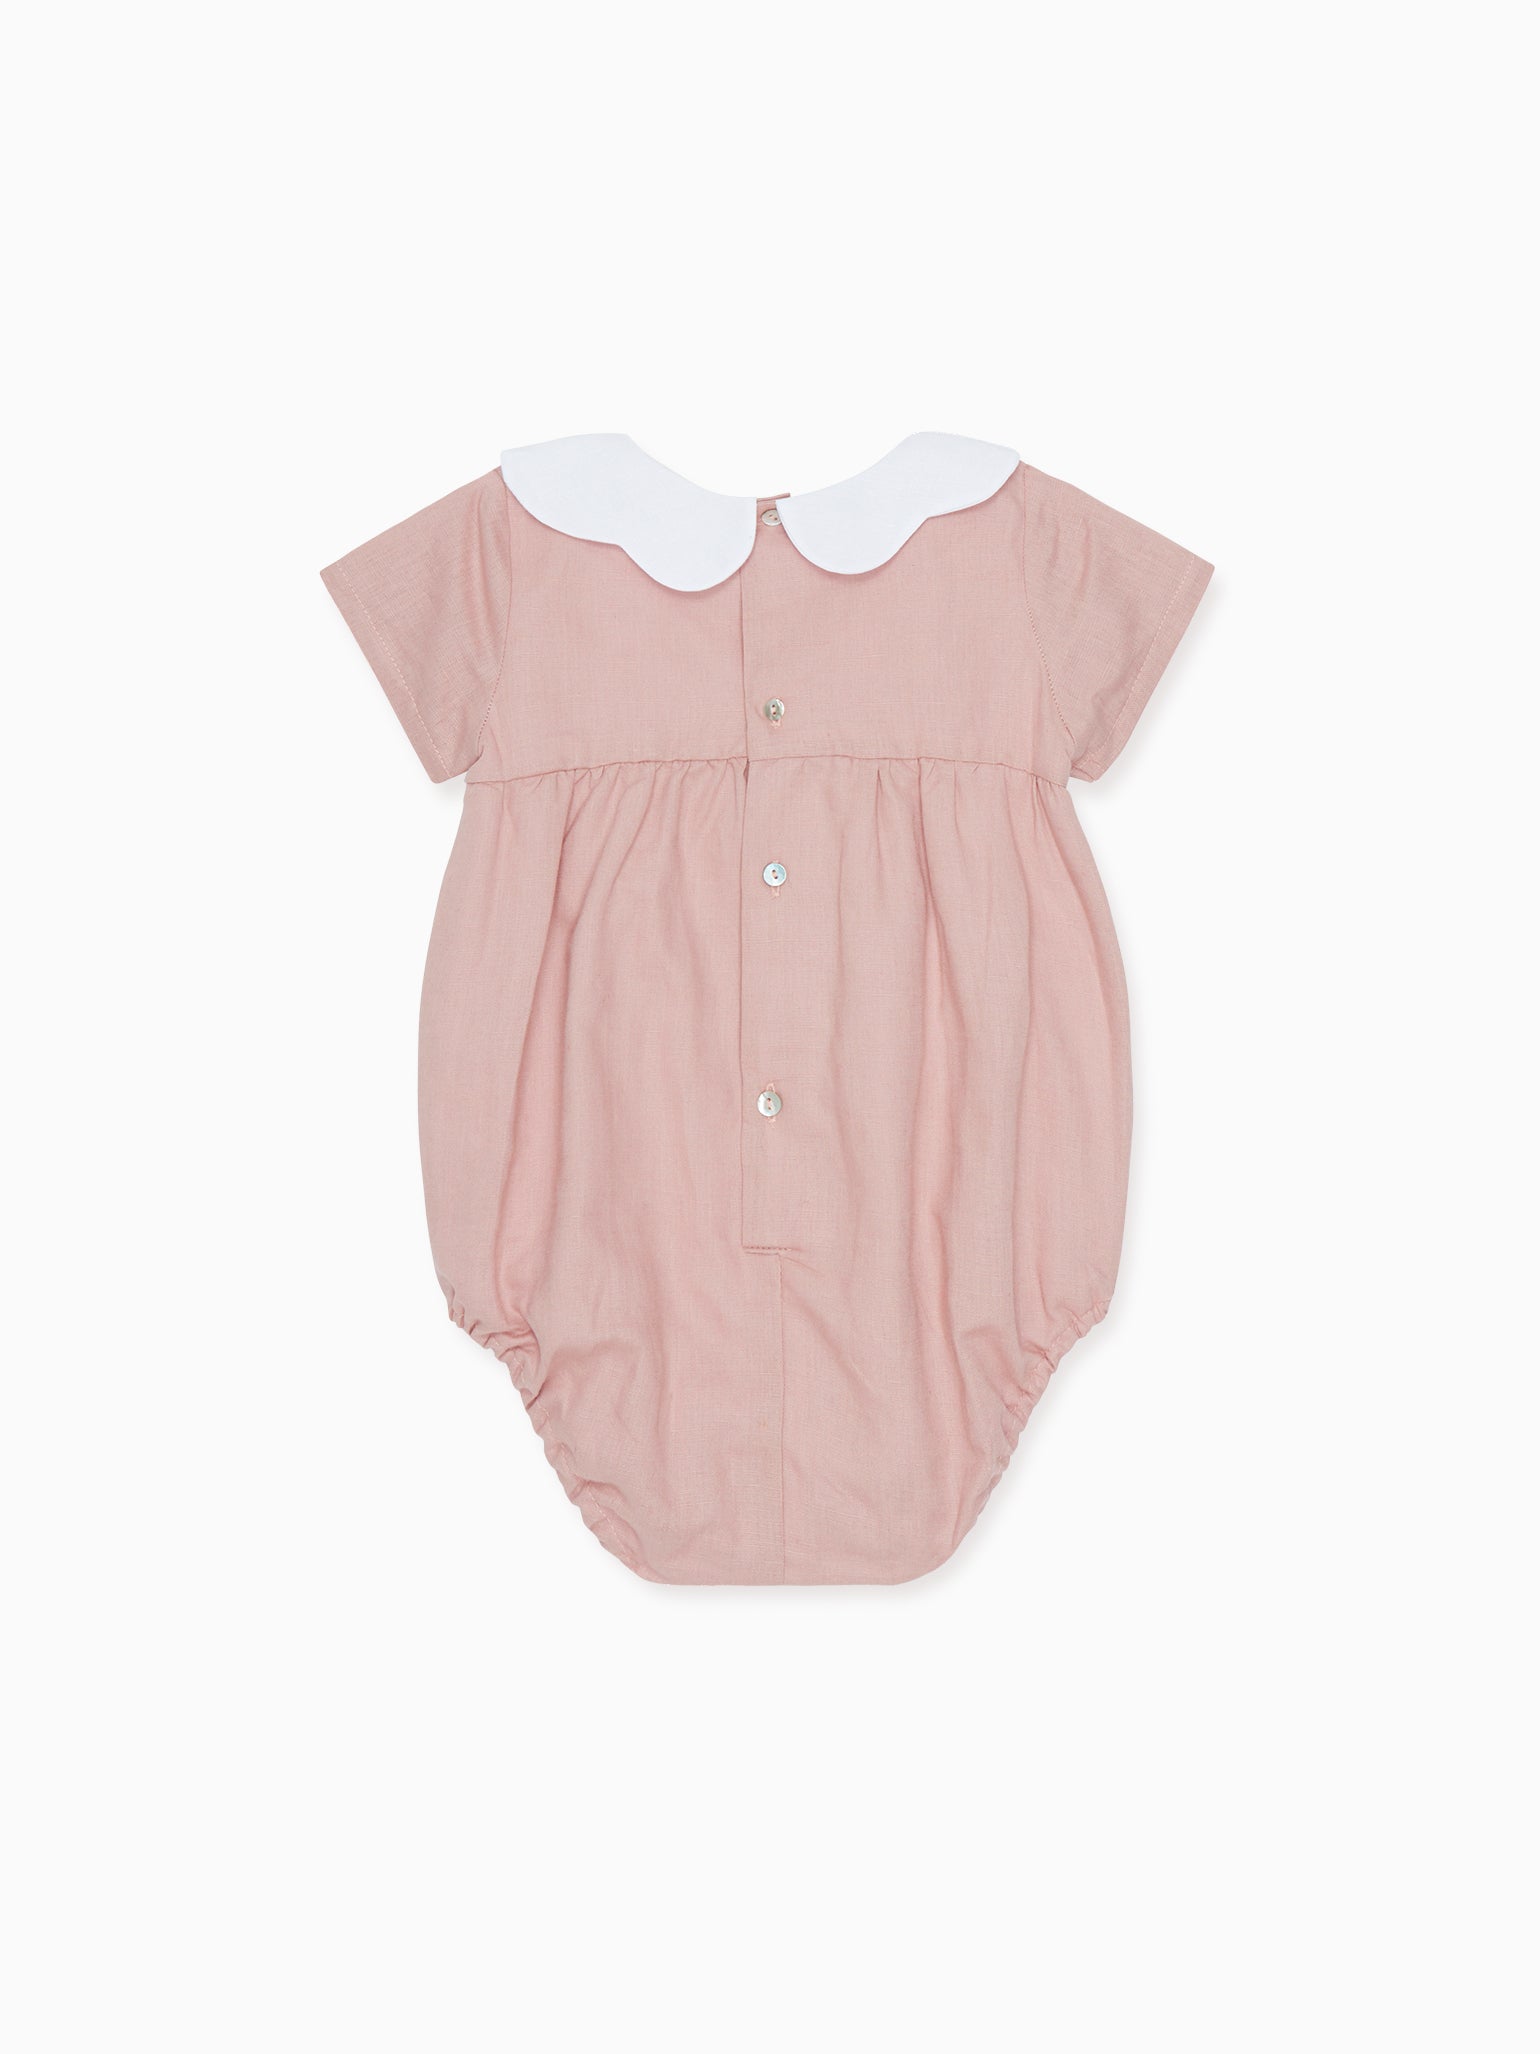 Dusty Pink Lina Baby Girl Romper